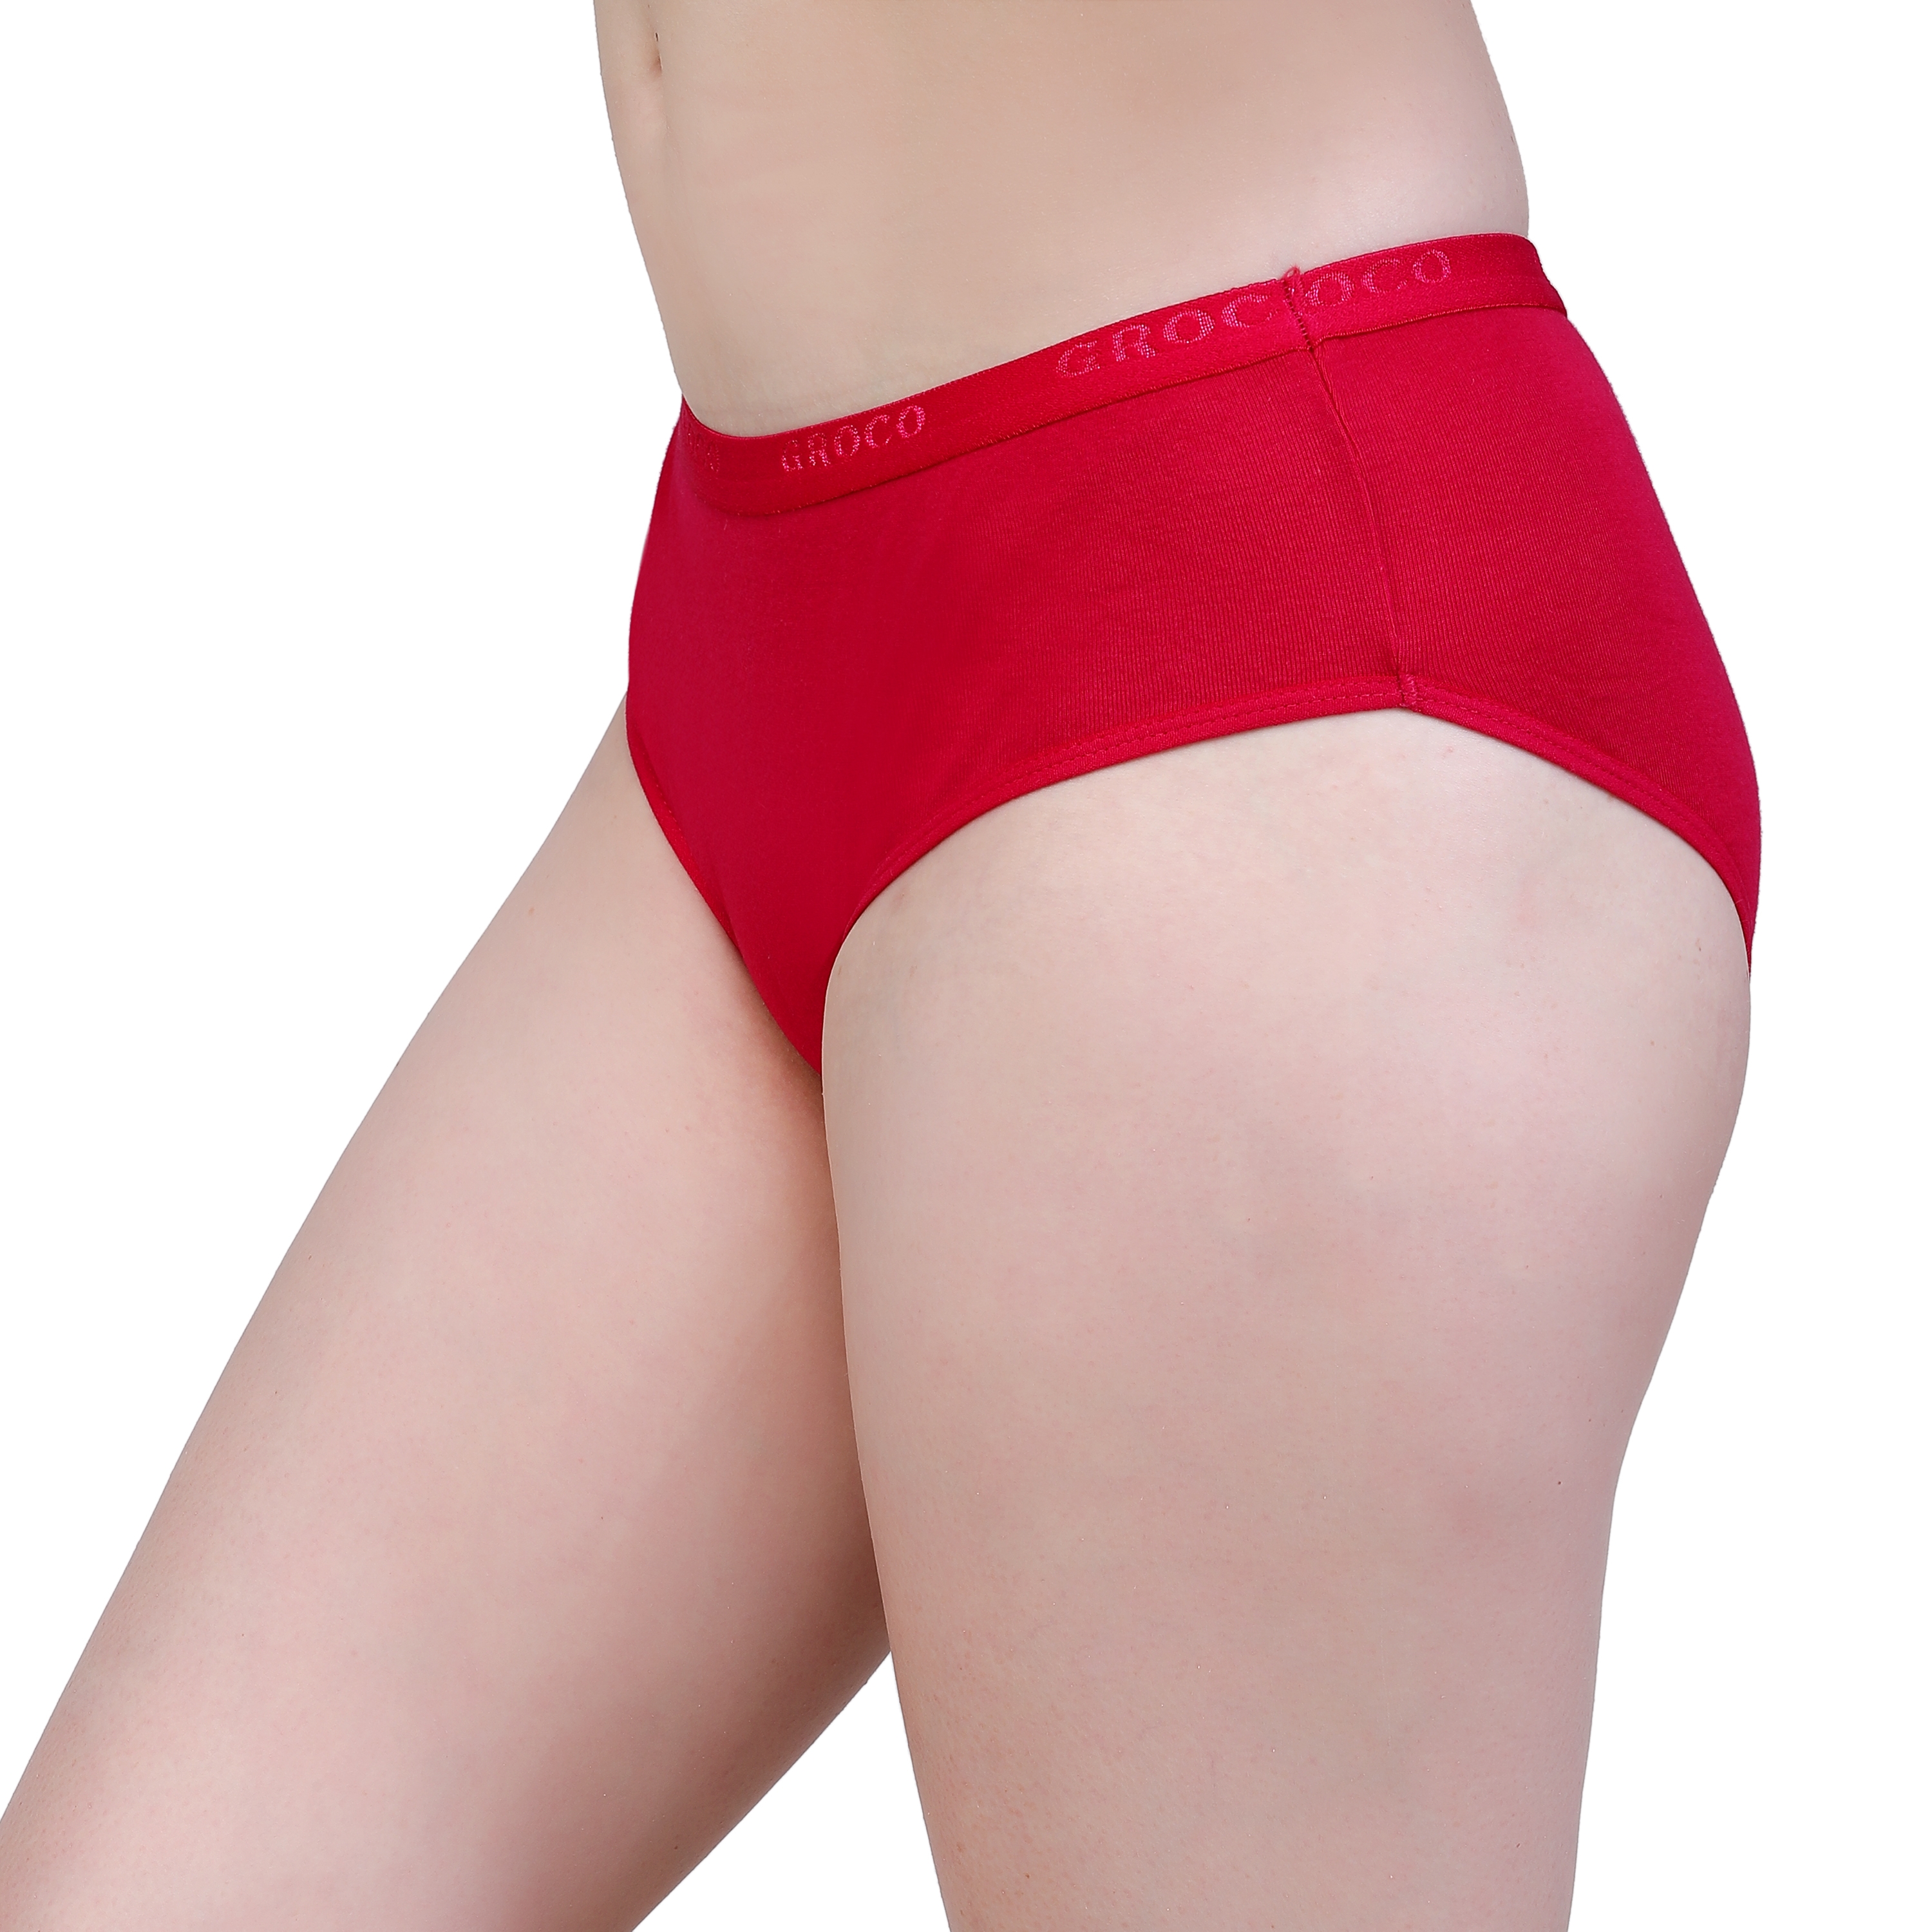 PEACH SMILE | PEACH SMILE Hipster Panties for Women 3